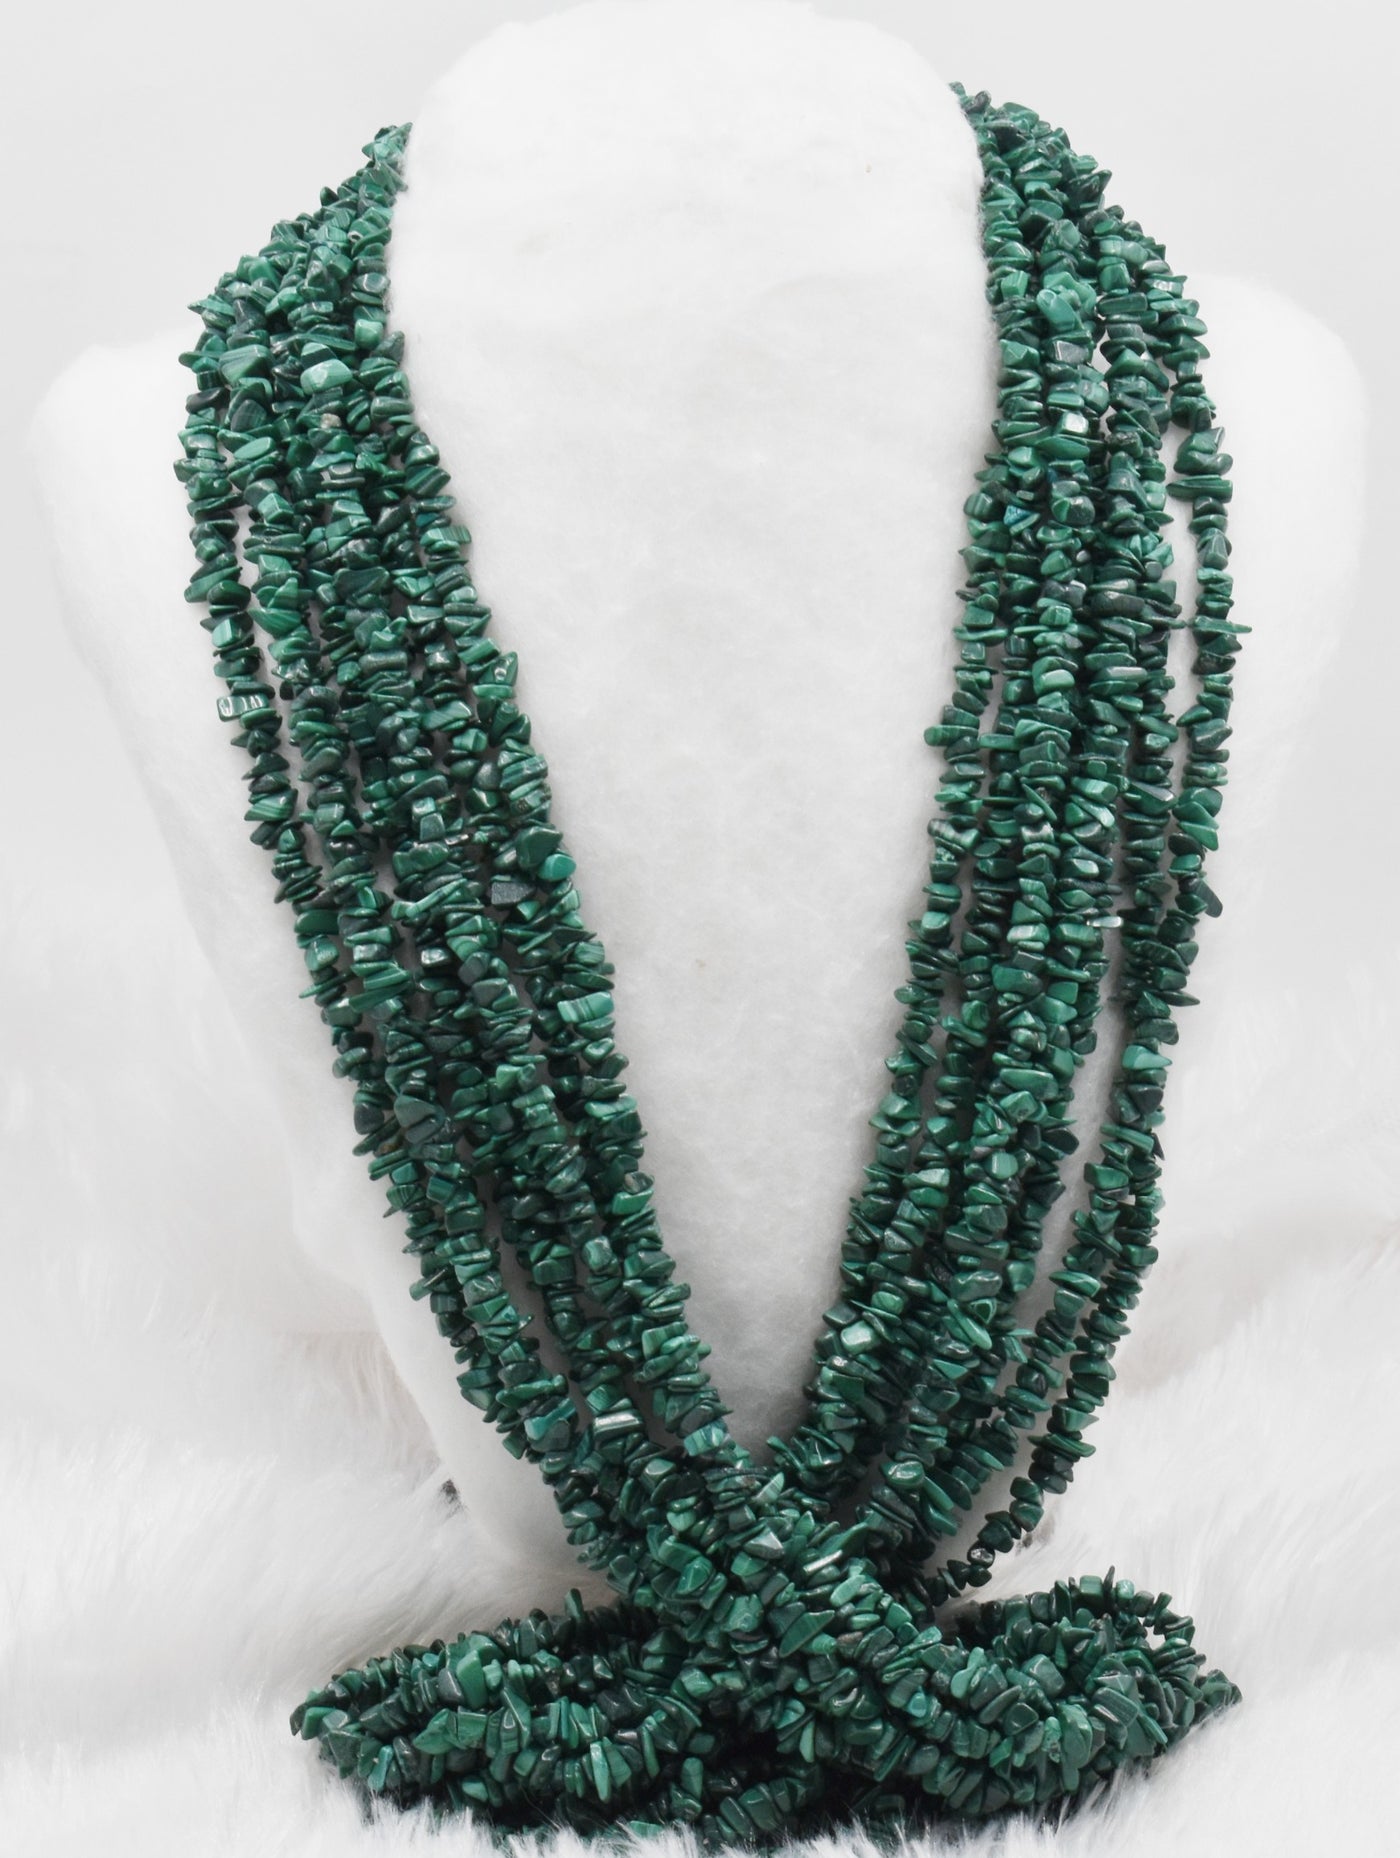 Uncut Raw Malachite Crystal Chip Beads for Necklace (Leadership and Travel)